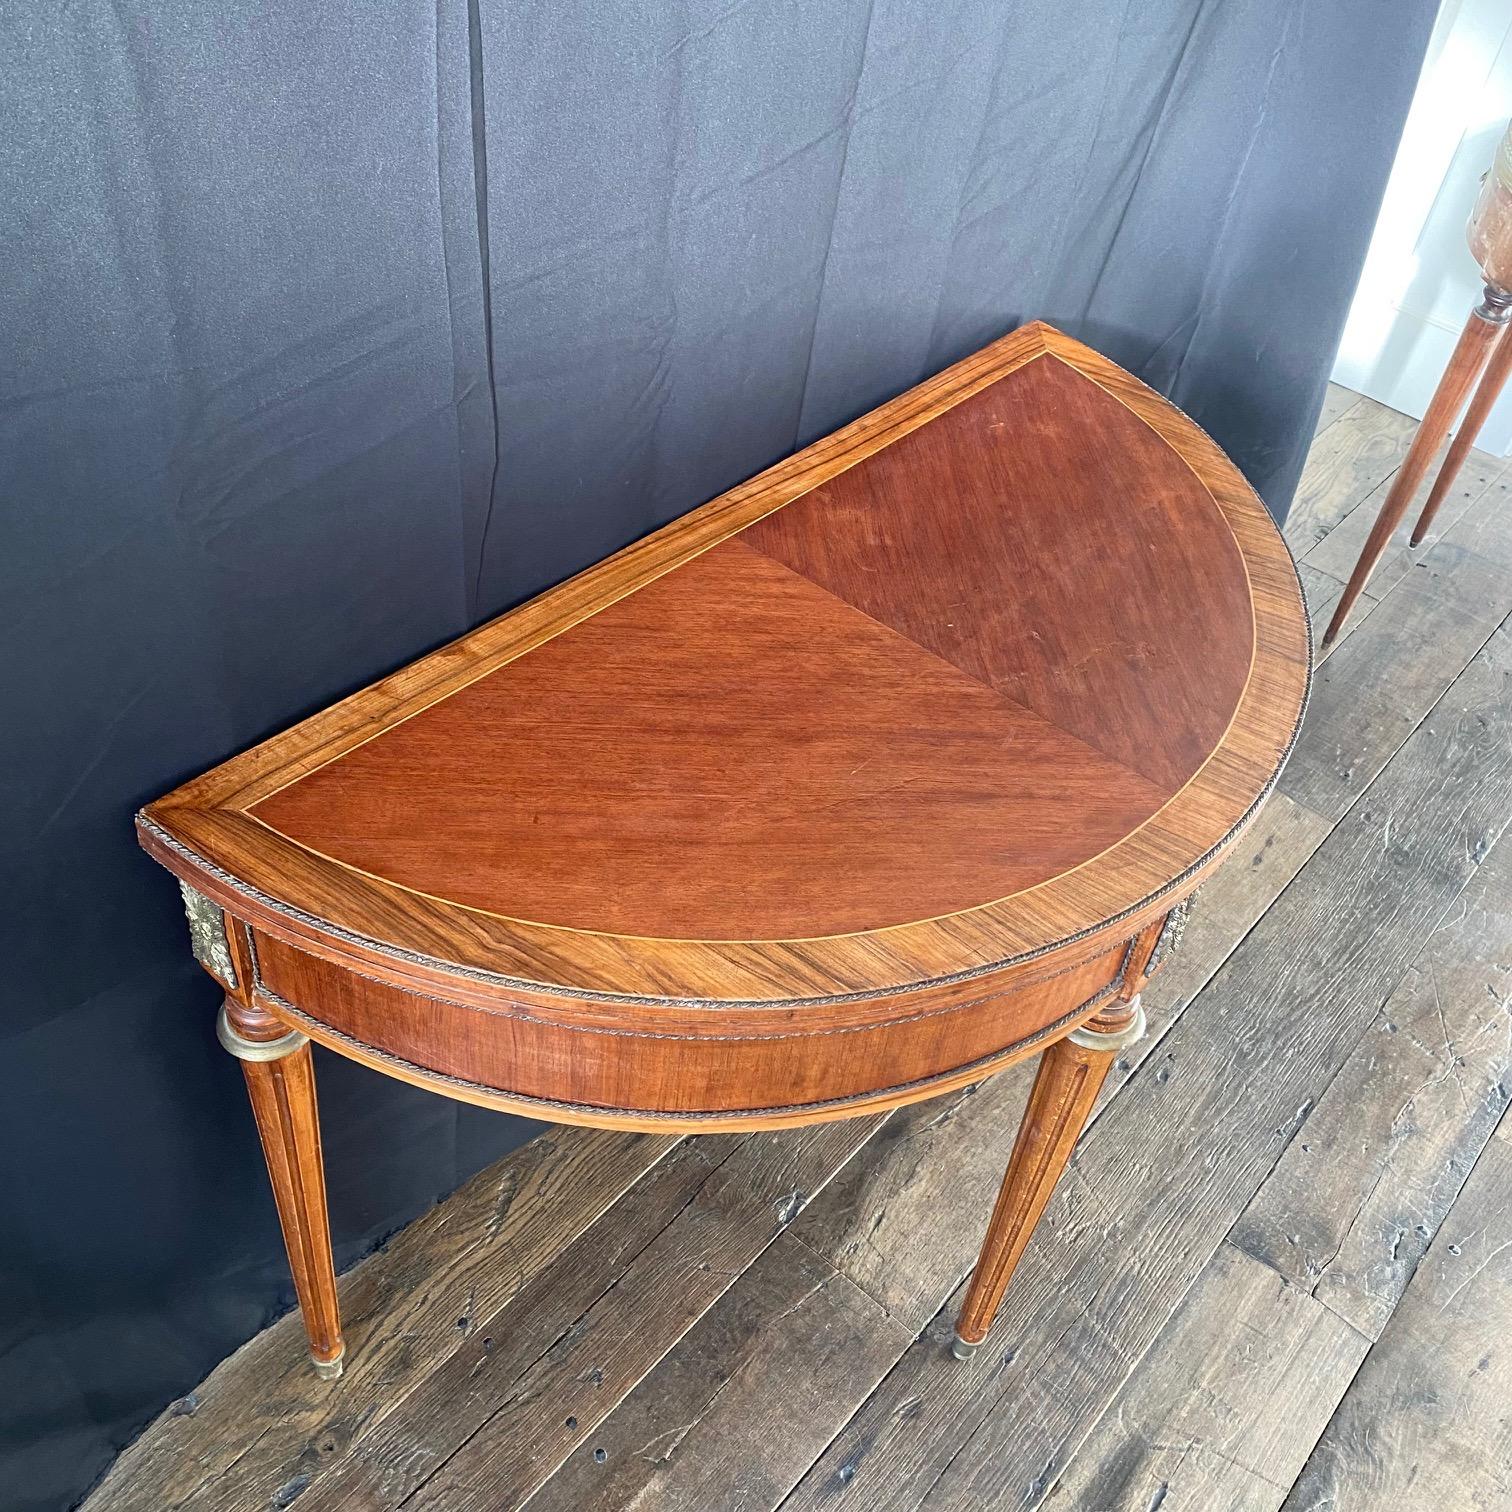 French game table and console. When closed it is a demilune console inlaid in walnut and fruitwood. When open the circular surface is embossed leather and wooden inlaid stripe border (see photos) to make a game table.  Console supported by solid